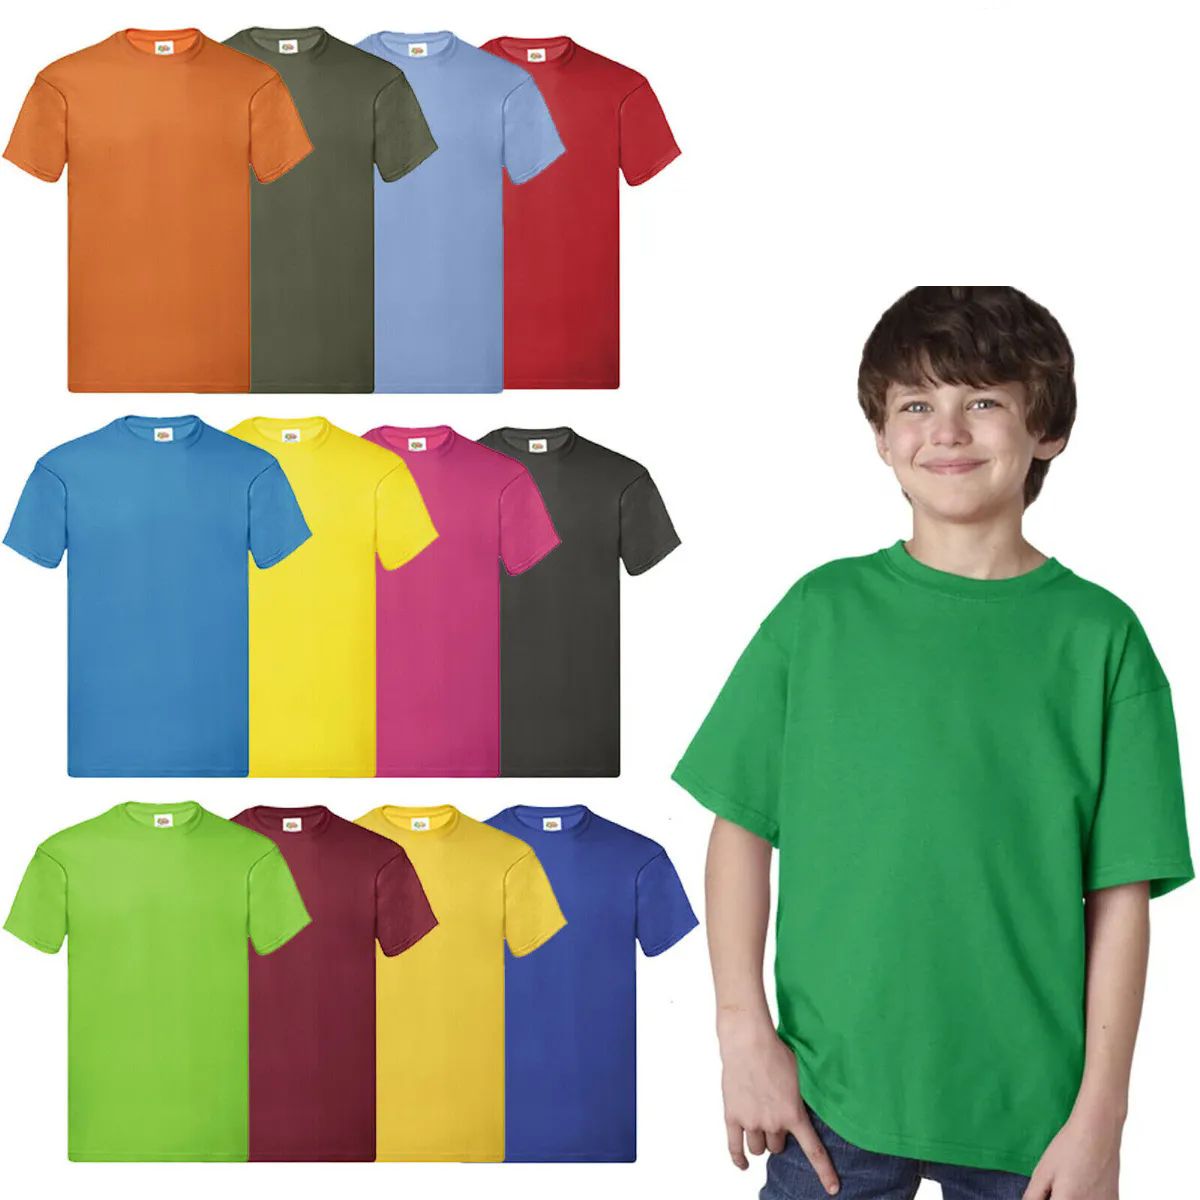 360 Pieces of Billion Hats Kids Youth Cotton Assorted Colors T Shirts Size L